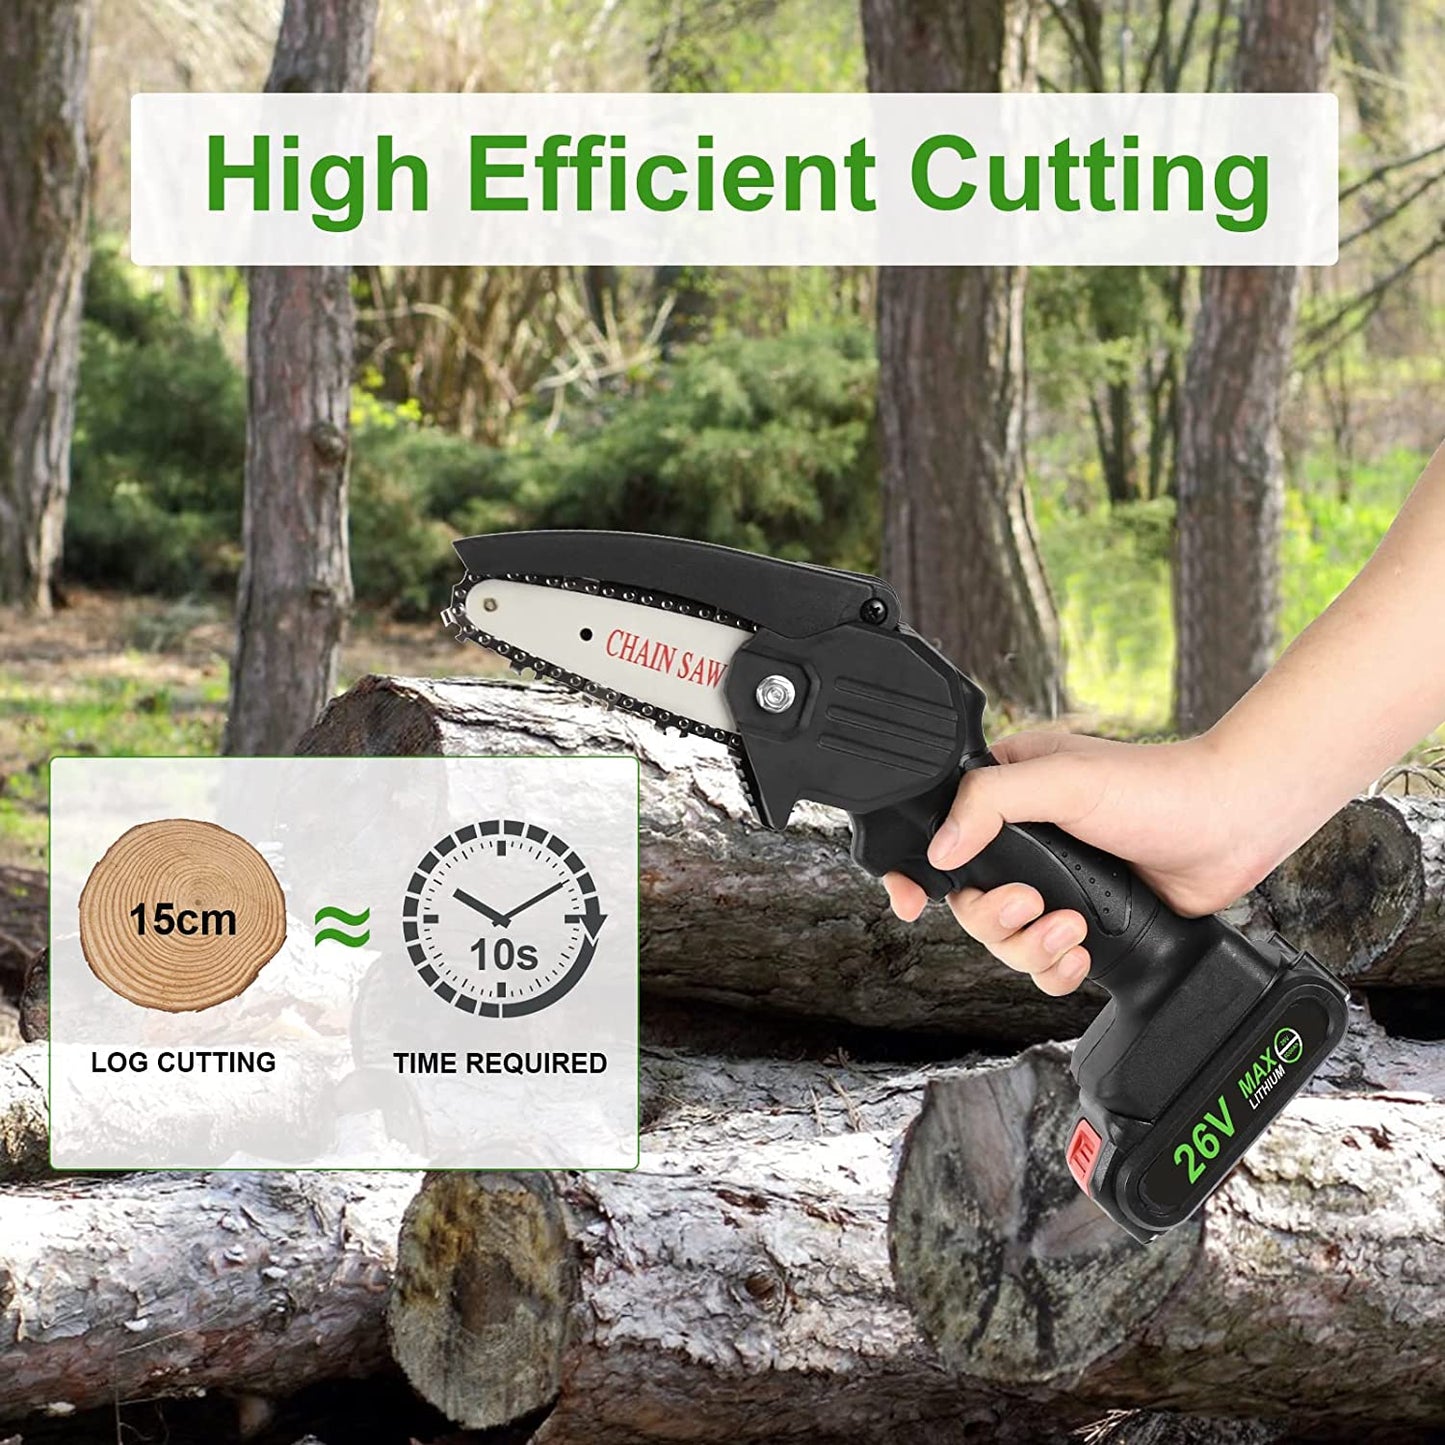 Mini Chainsaw, 4 Inch 26v, 2 Battery & Chain, Security Lock, Portable, Wood Cutting Tree Trimming